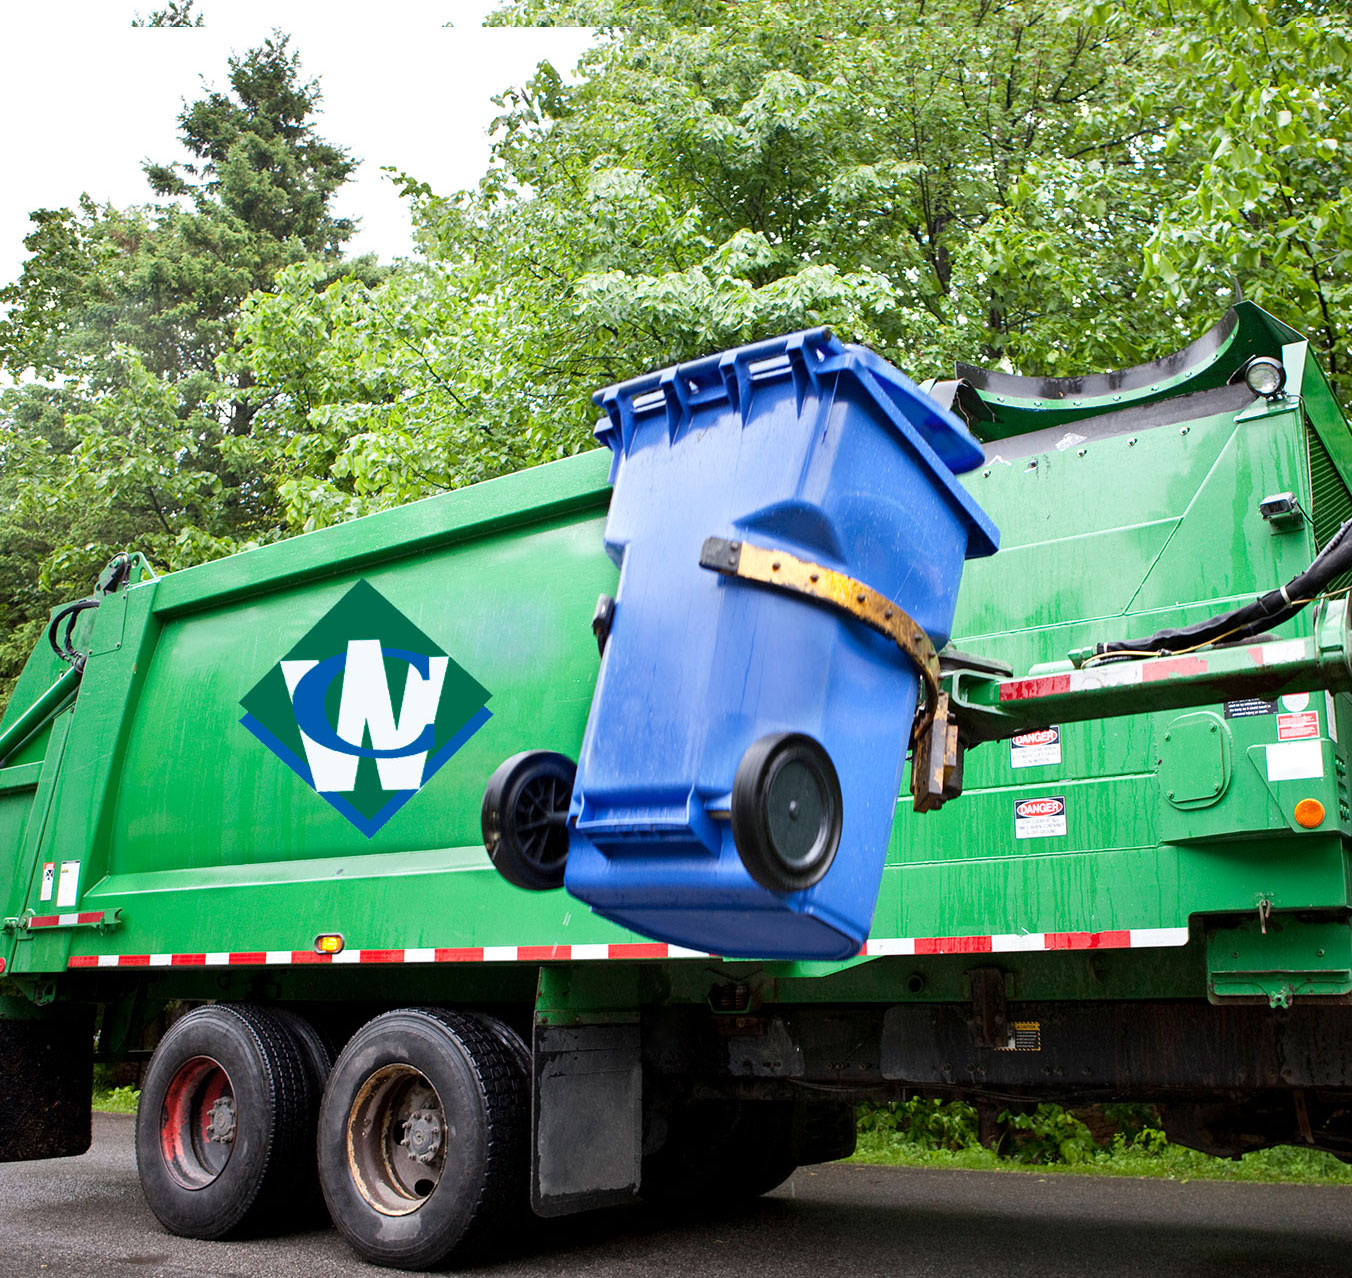 Trash & Recycling Schedule Update Following the recent winter storm, WCID No. 17 customers who receive trash service can plan on the following schedule: Wednesday customer will be serviced on Thursday 2/2/2023 Thursday customers will be serviced on Friday 2/3/2023 Friday customers will be serviced on Saturday 2/4/2023